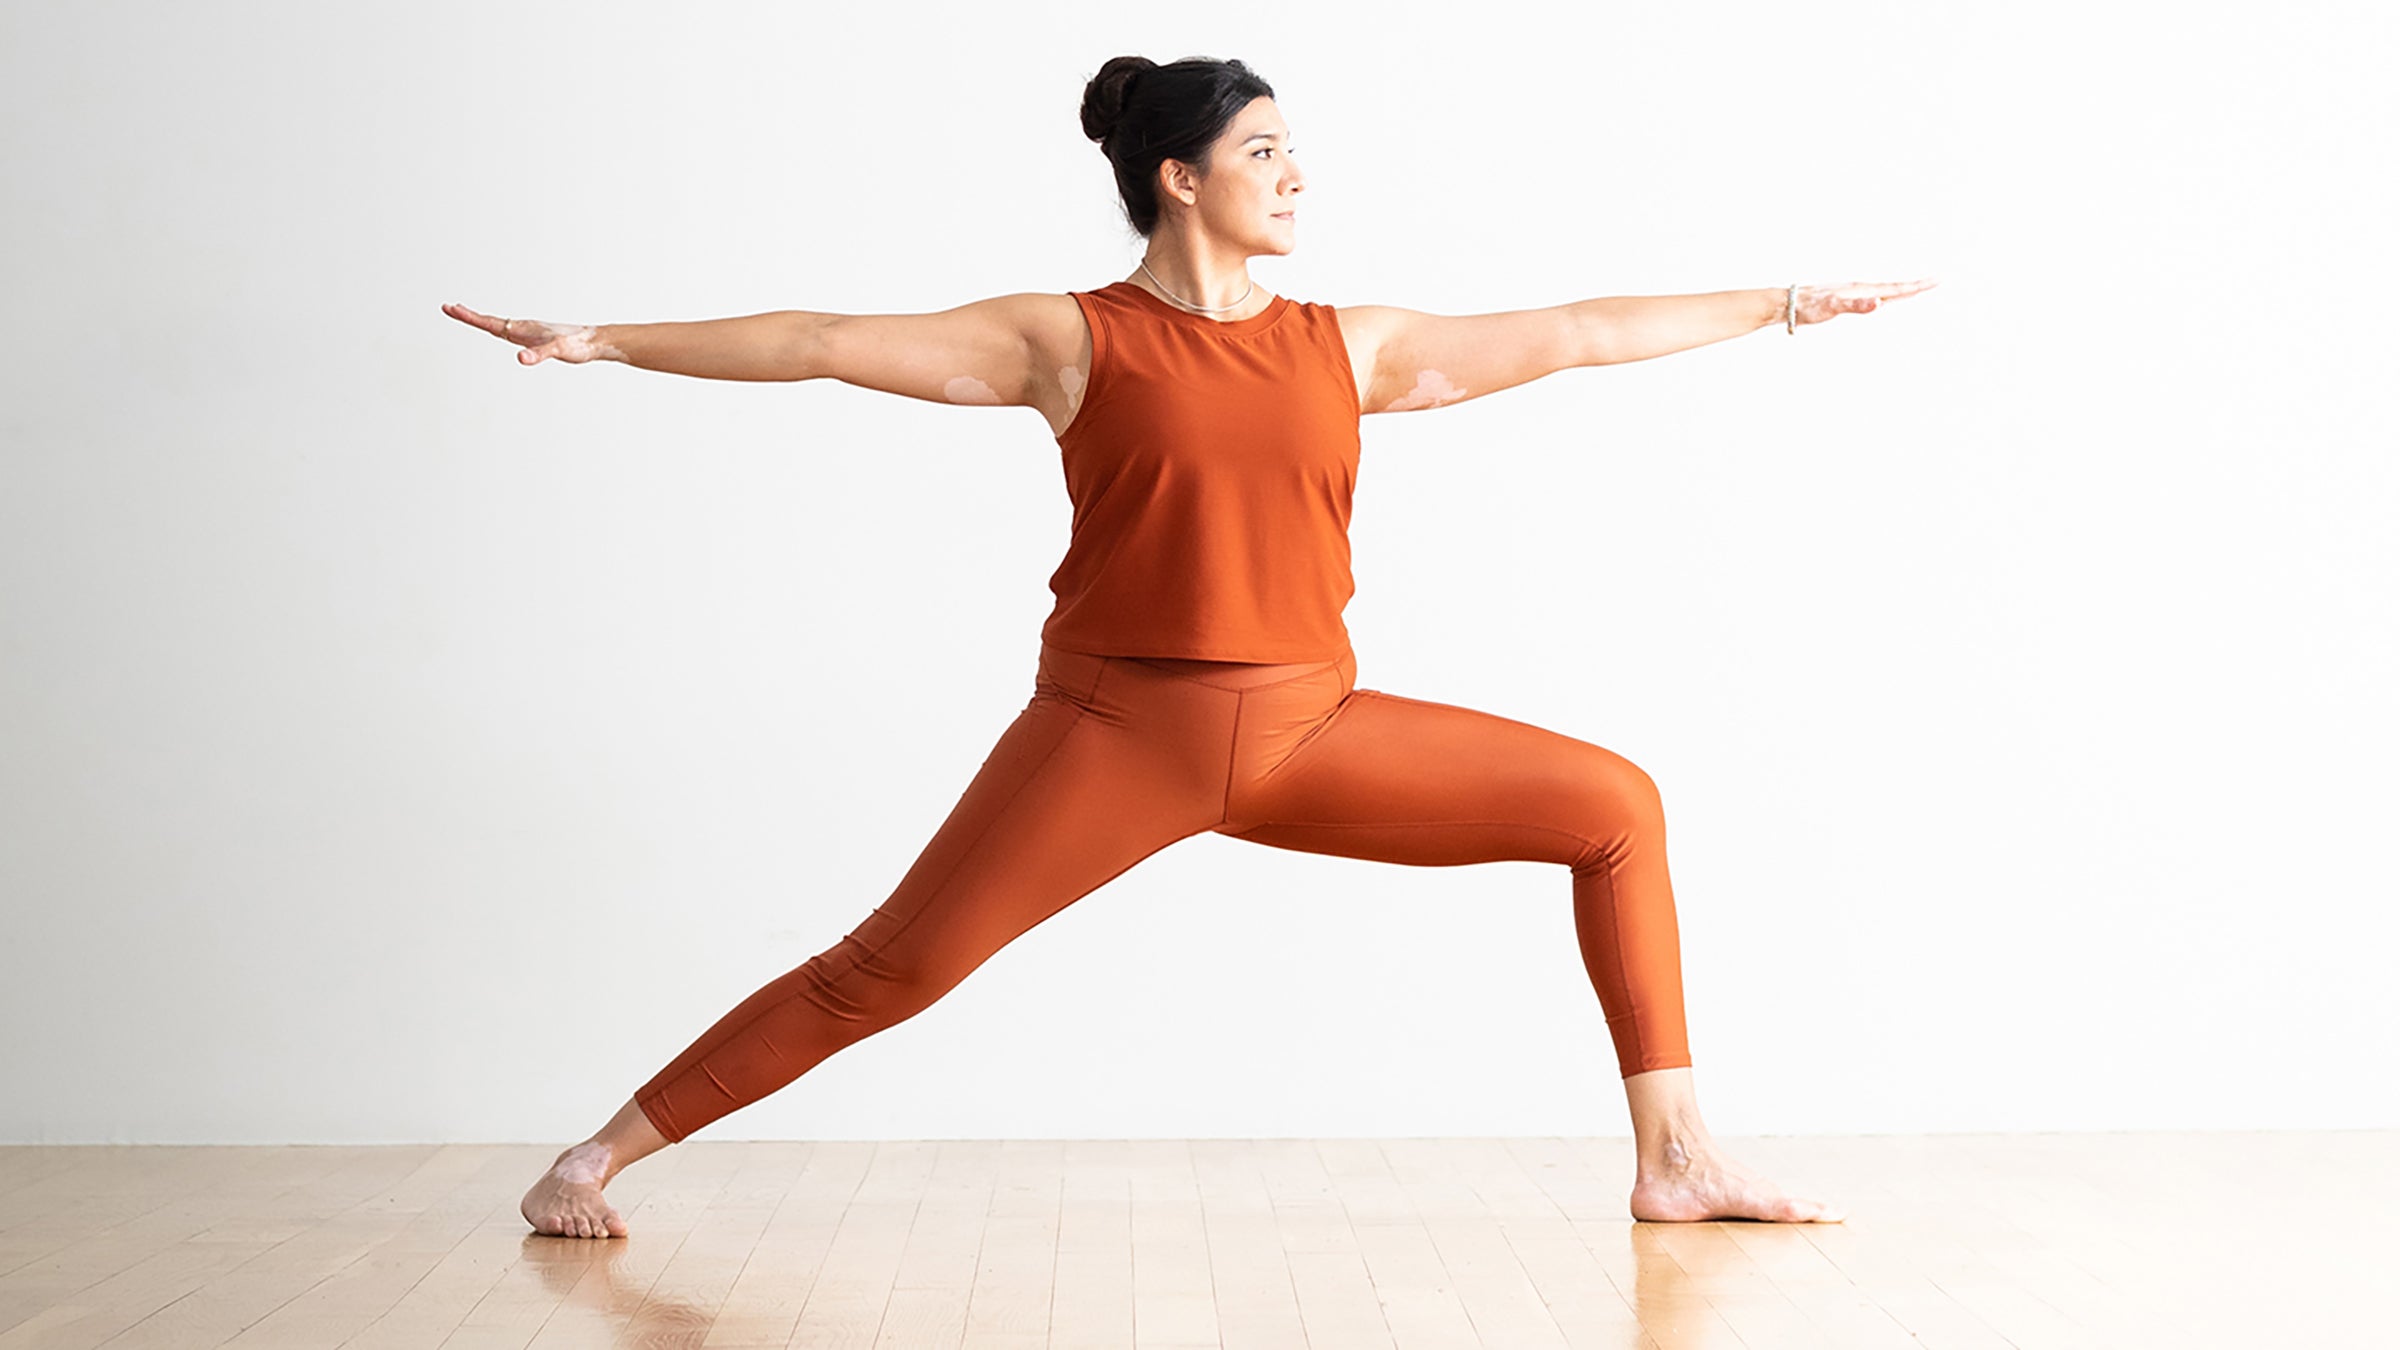 A 10-Minute Morning Yoga Practice to Jump-Start Your Day